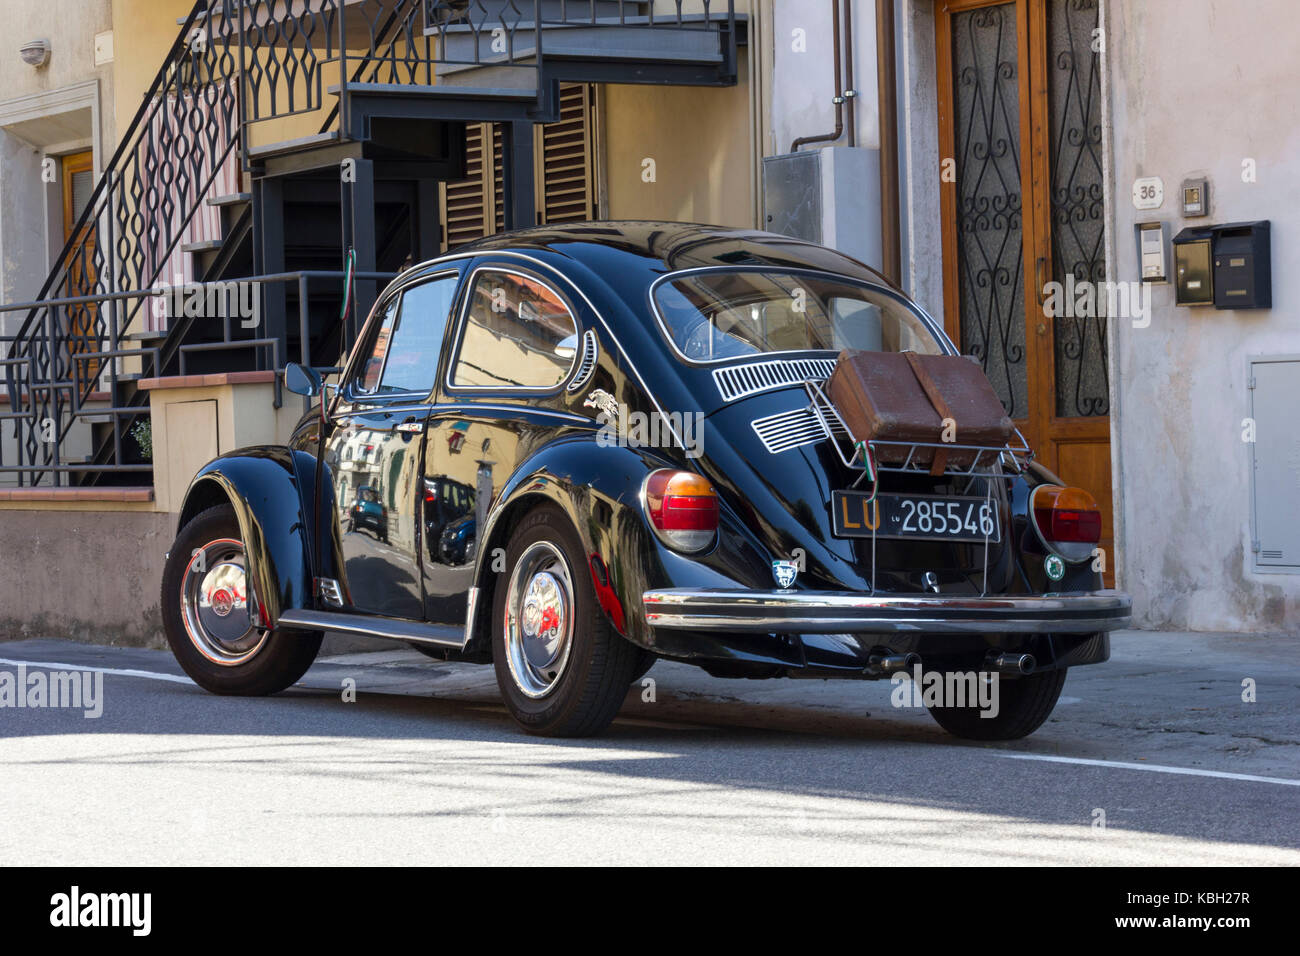 LASTRA A SIGNA, ITALY - AUGUST 30 3015: Black vintage Beetle parked on the street in Lastra a Signa, Tuscany Stock Photo